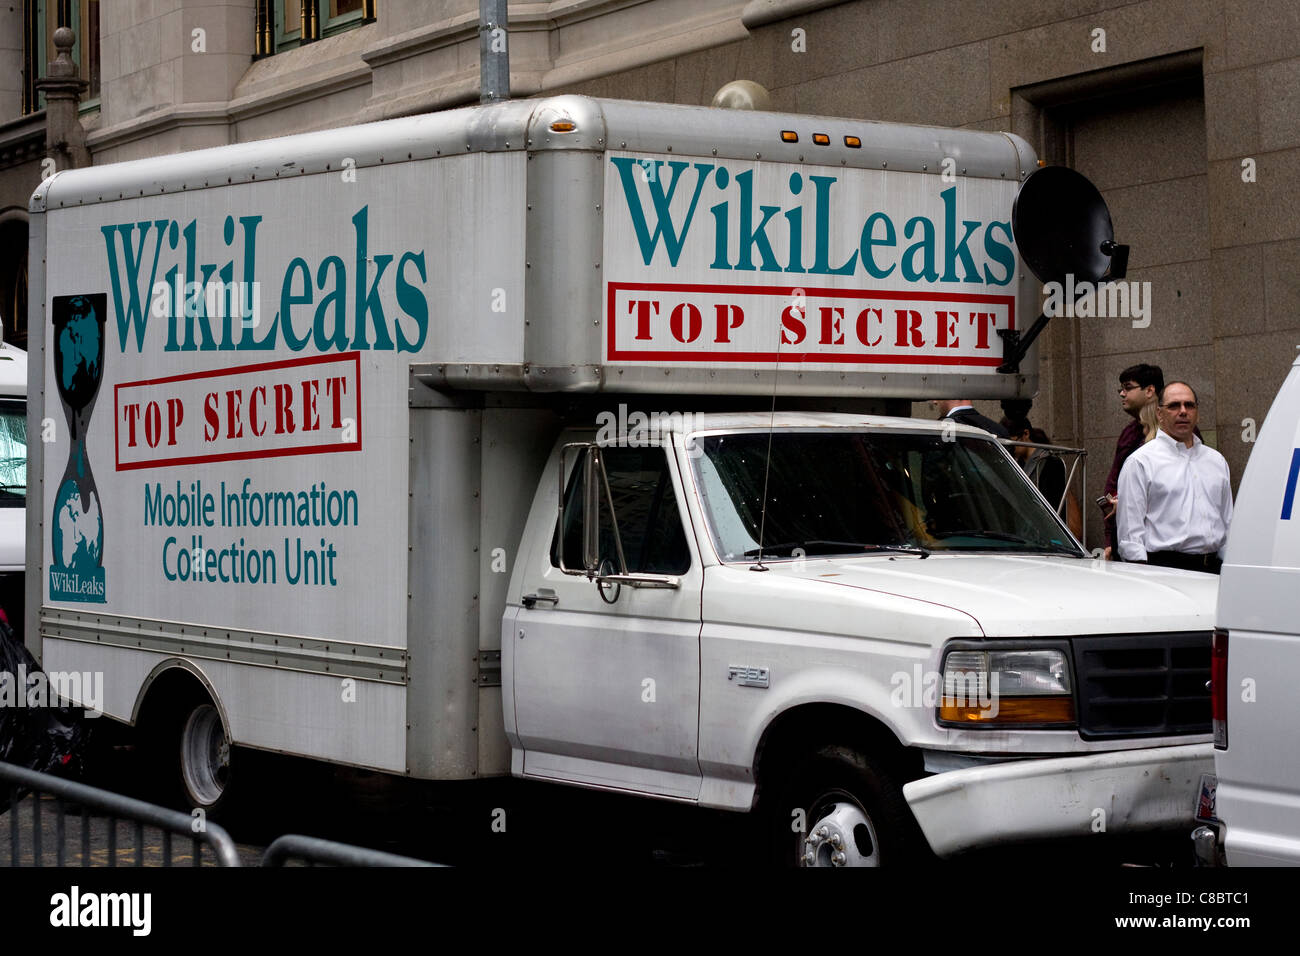 WikiLeaks TOP SECRET Mobile Information Collection Unit on the side of a Ford F-350 Box Truck with satellite dish attached Stock Photo